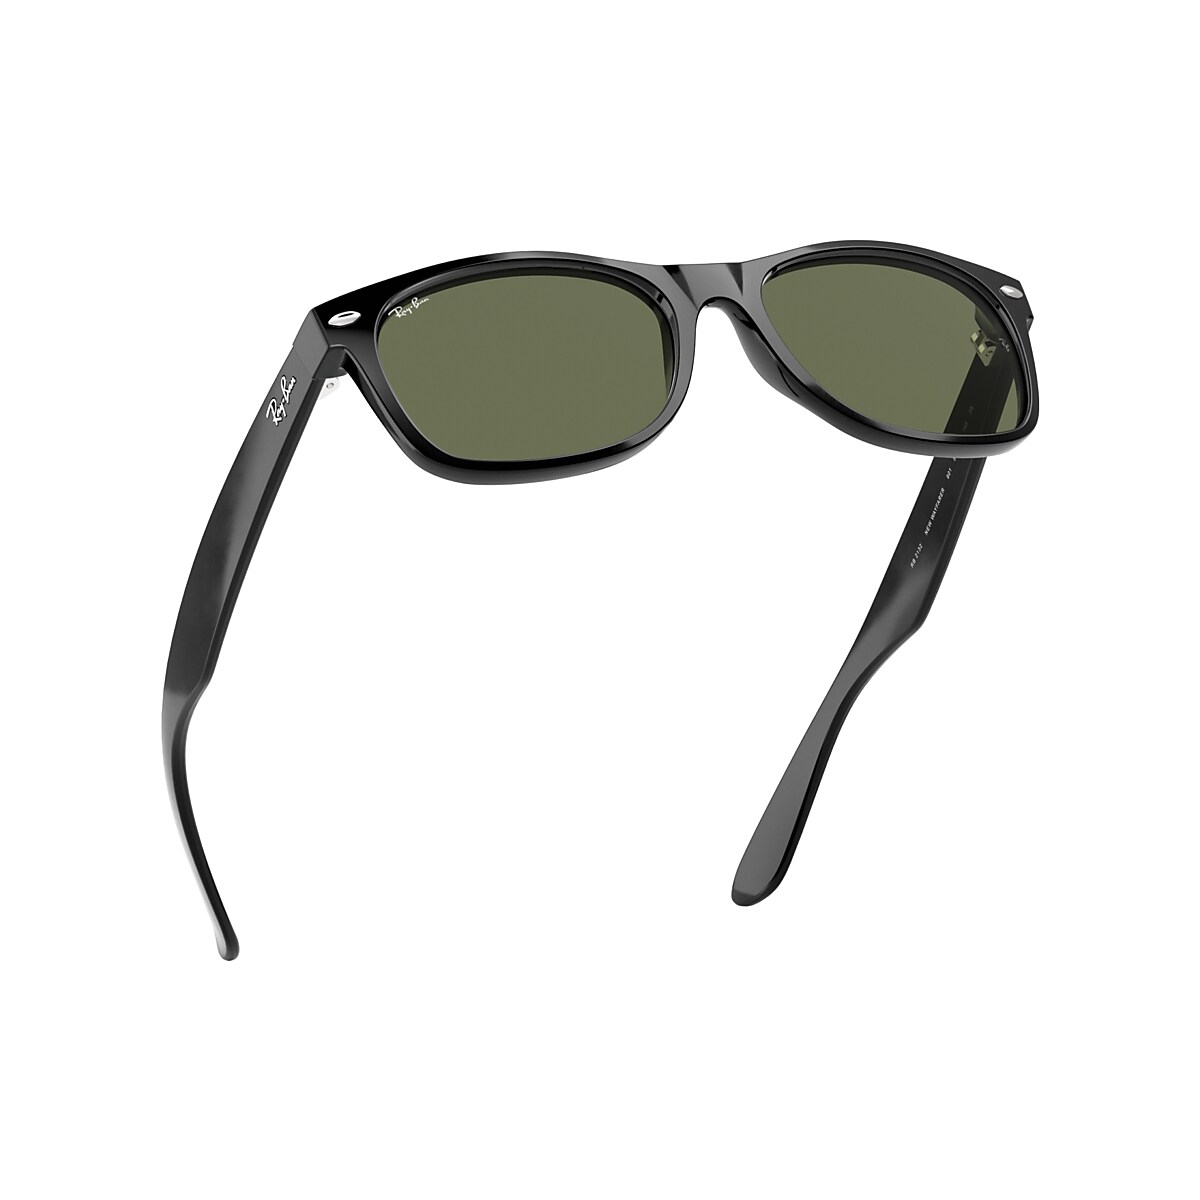 NEW WAYFARER CLASSIC Sunglasses in Black and Green - RB2132